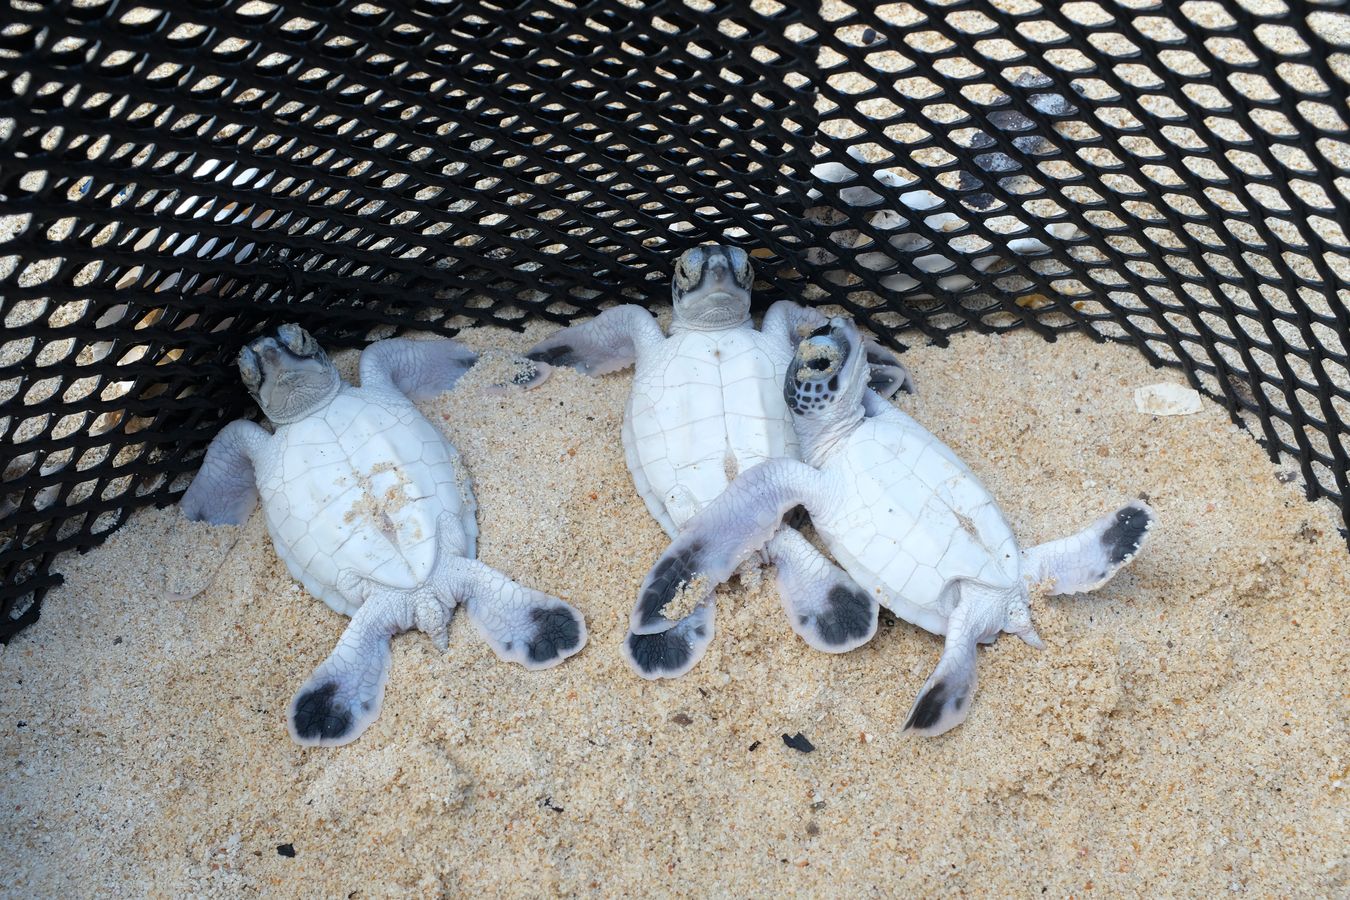 Comical moment of three newborn green turtles lying on their backs in the hatchery nest.